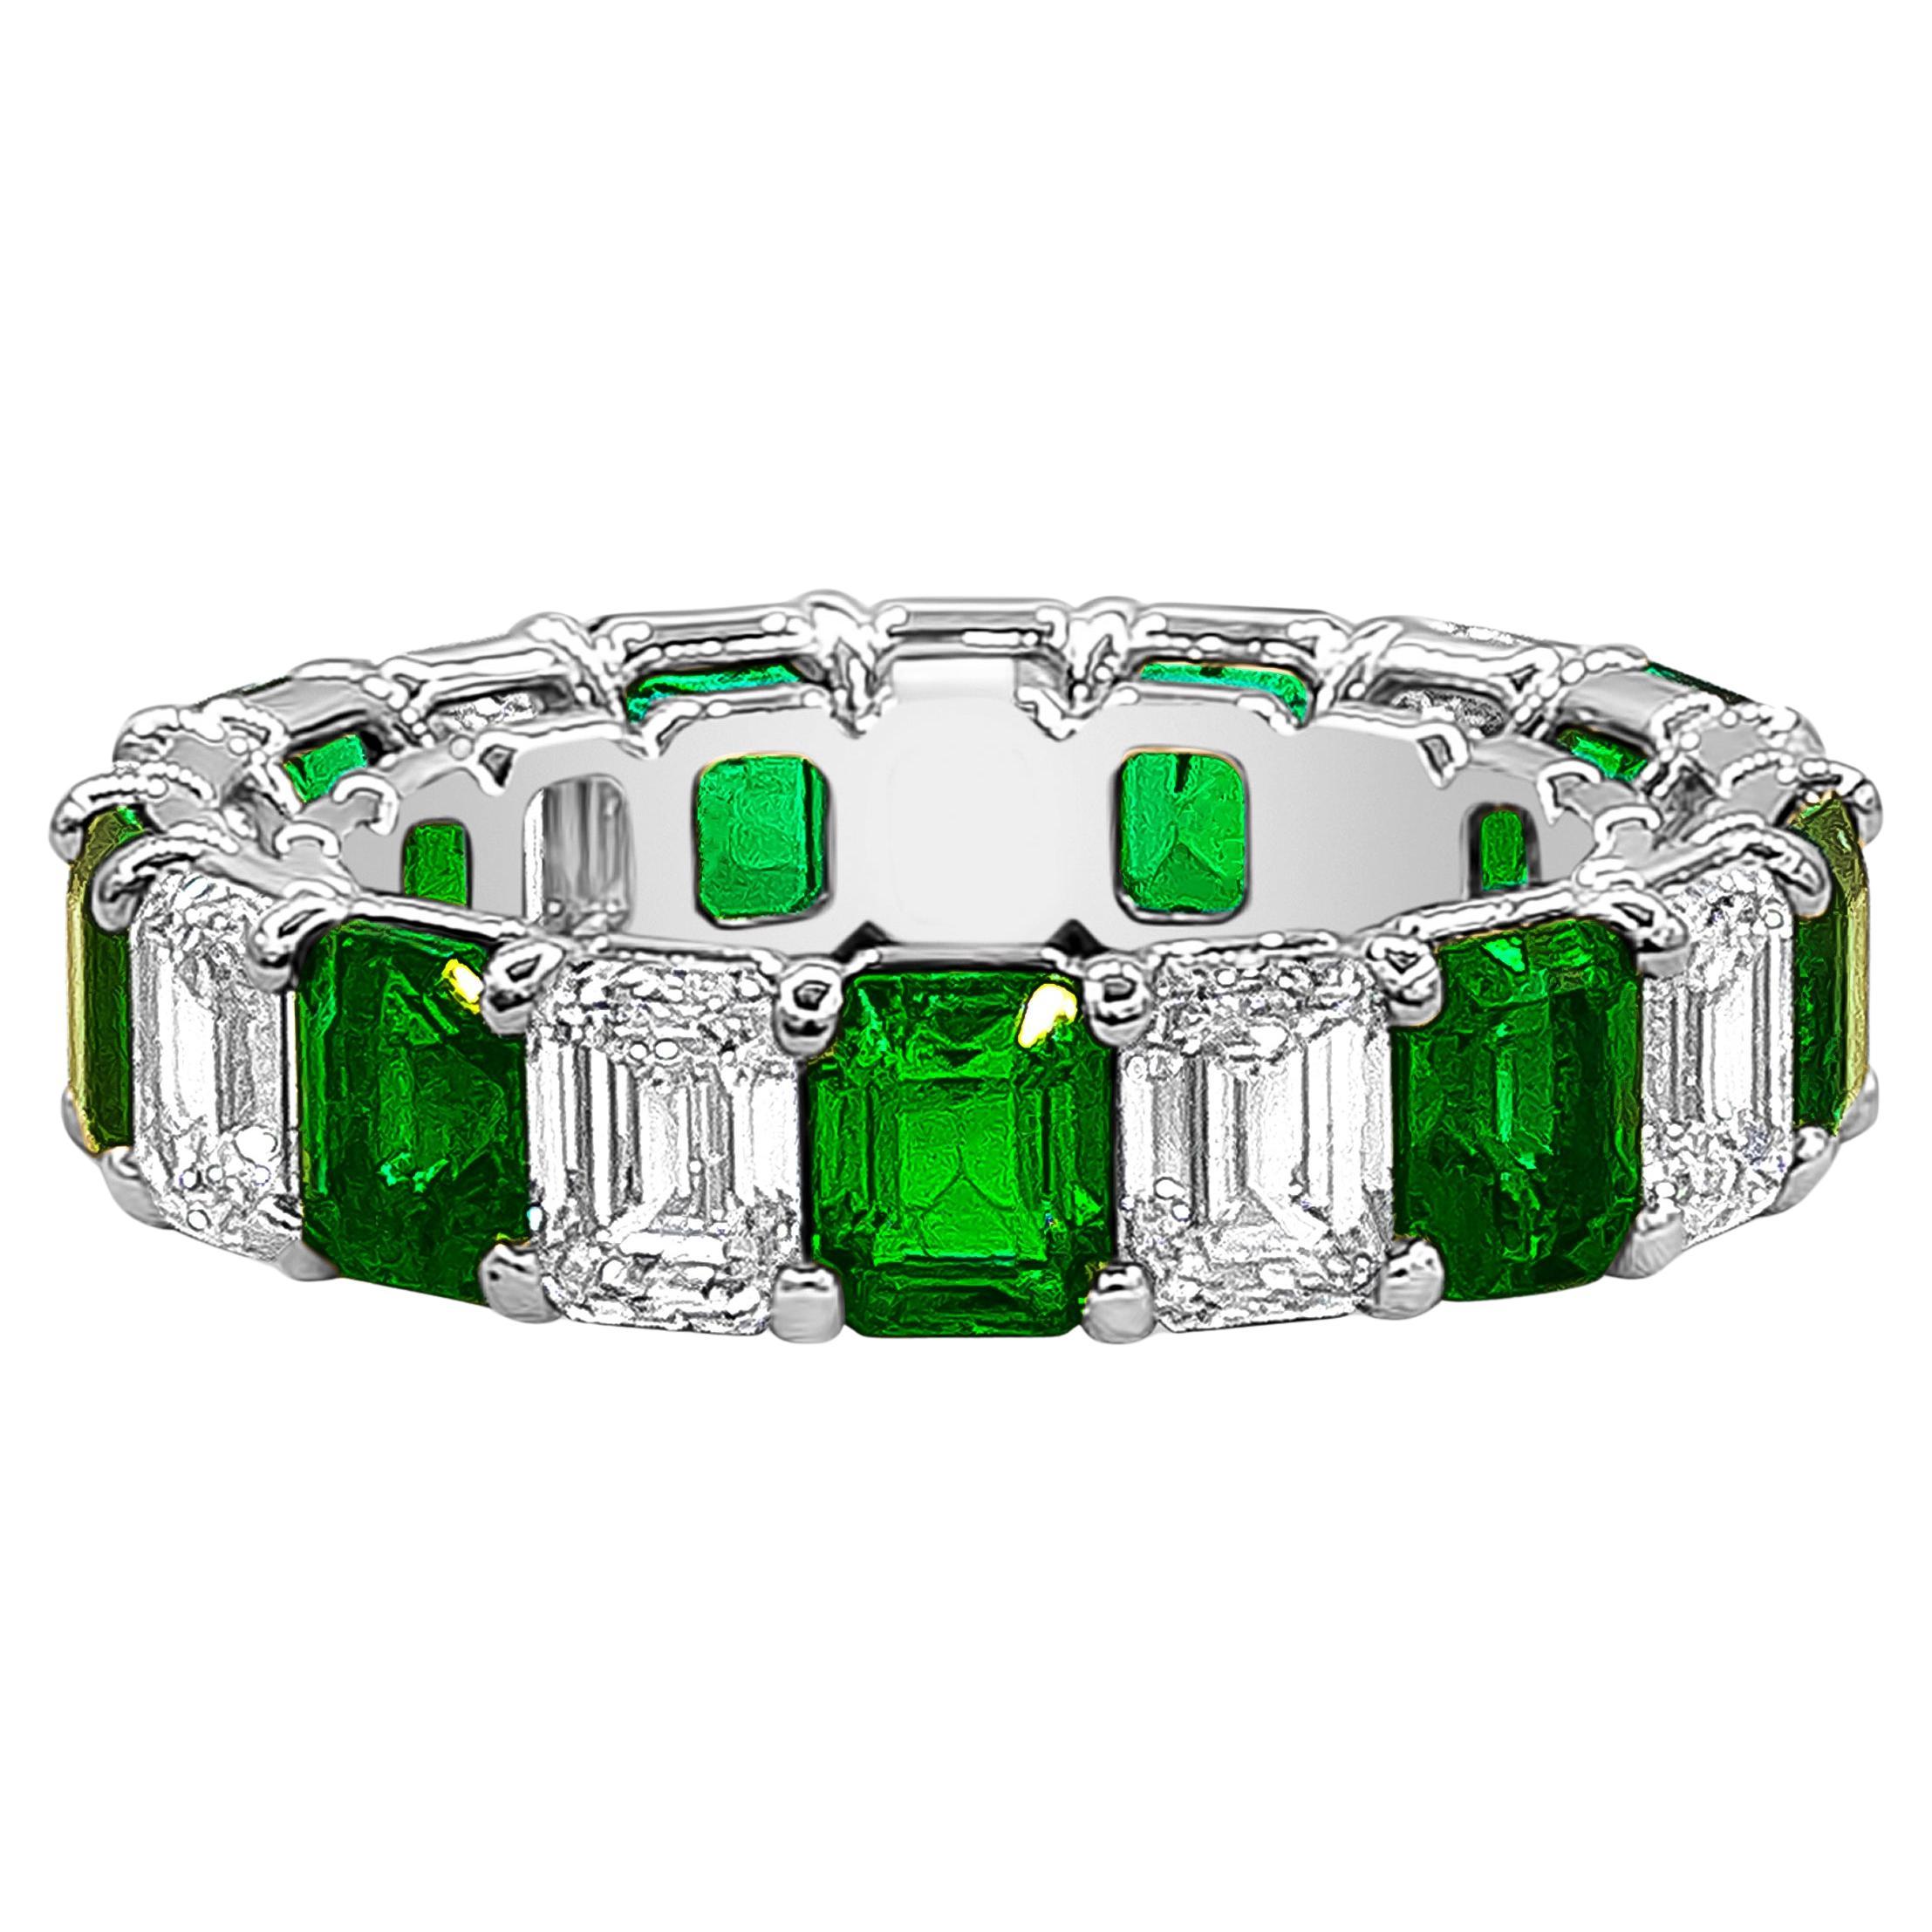 Showcasing an eternity band 4.24 carats total of emerald cut green emeralds. Alternating with 4.21 carats total of emerald cut diamonds, H color and VS in clarity. Made with an open gallery setting in Platinum. Size 6.5 US, resizable upon request